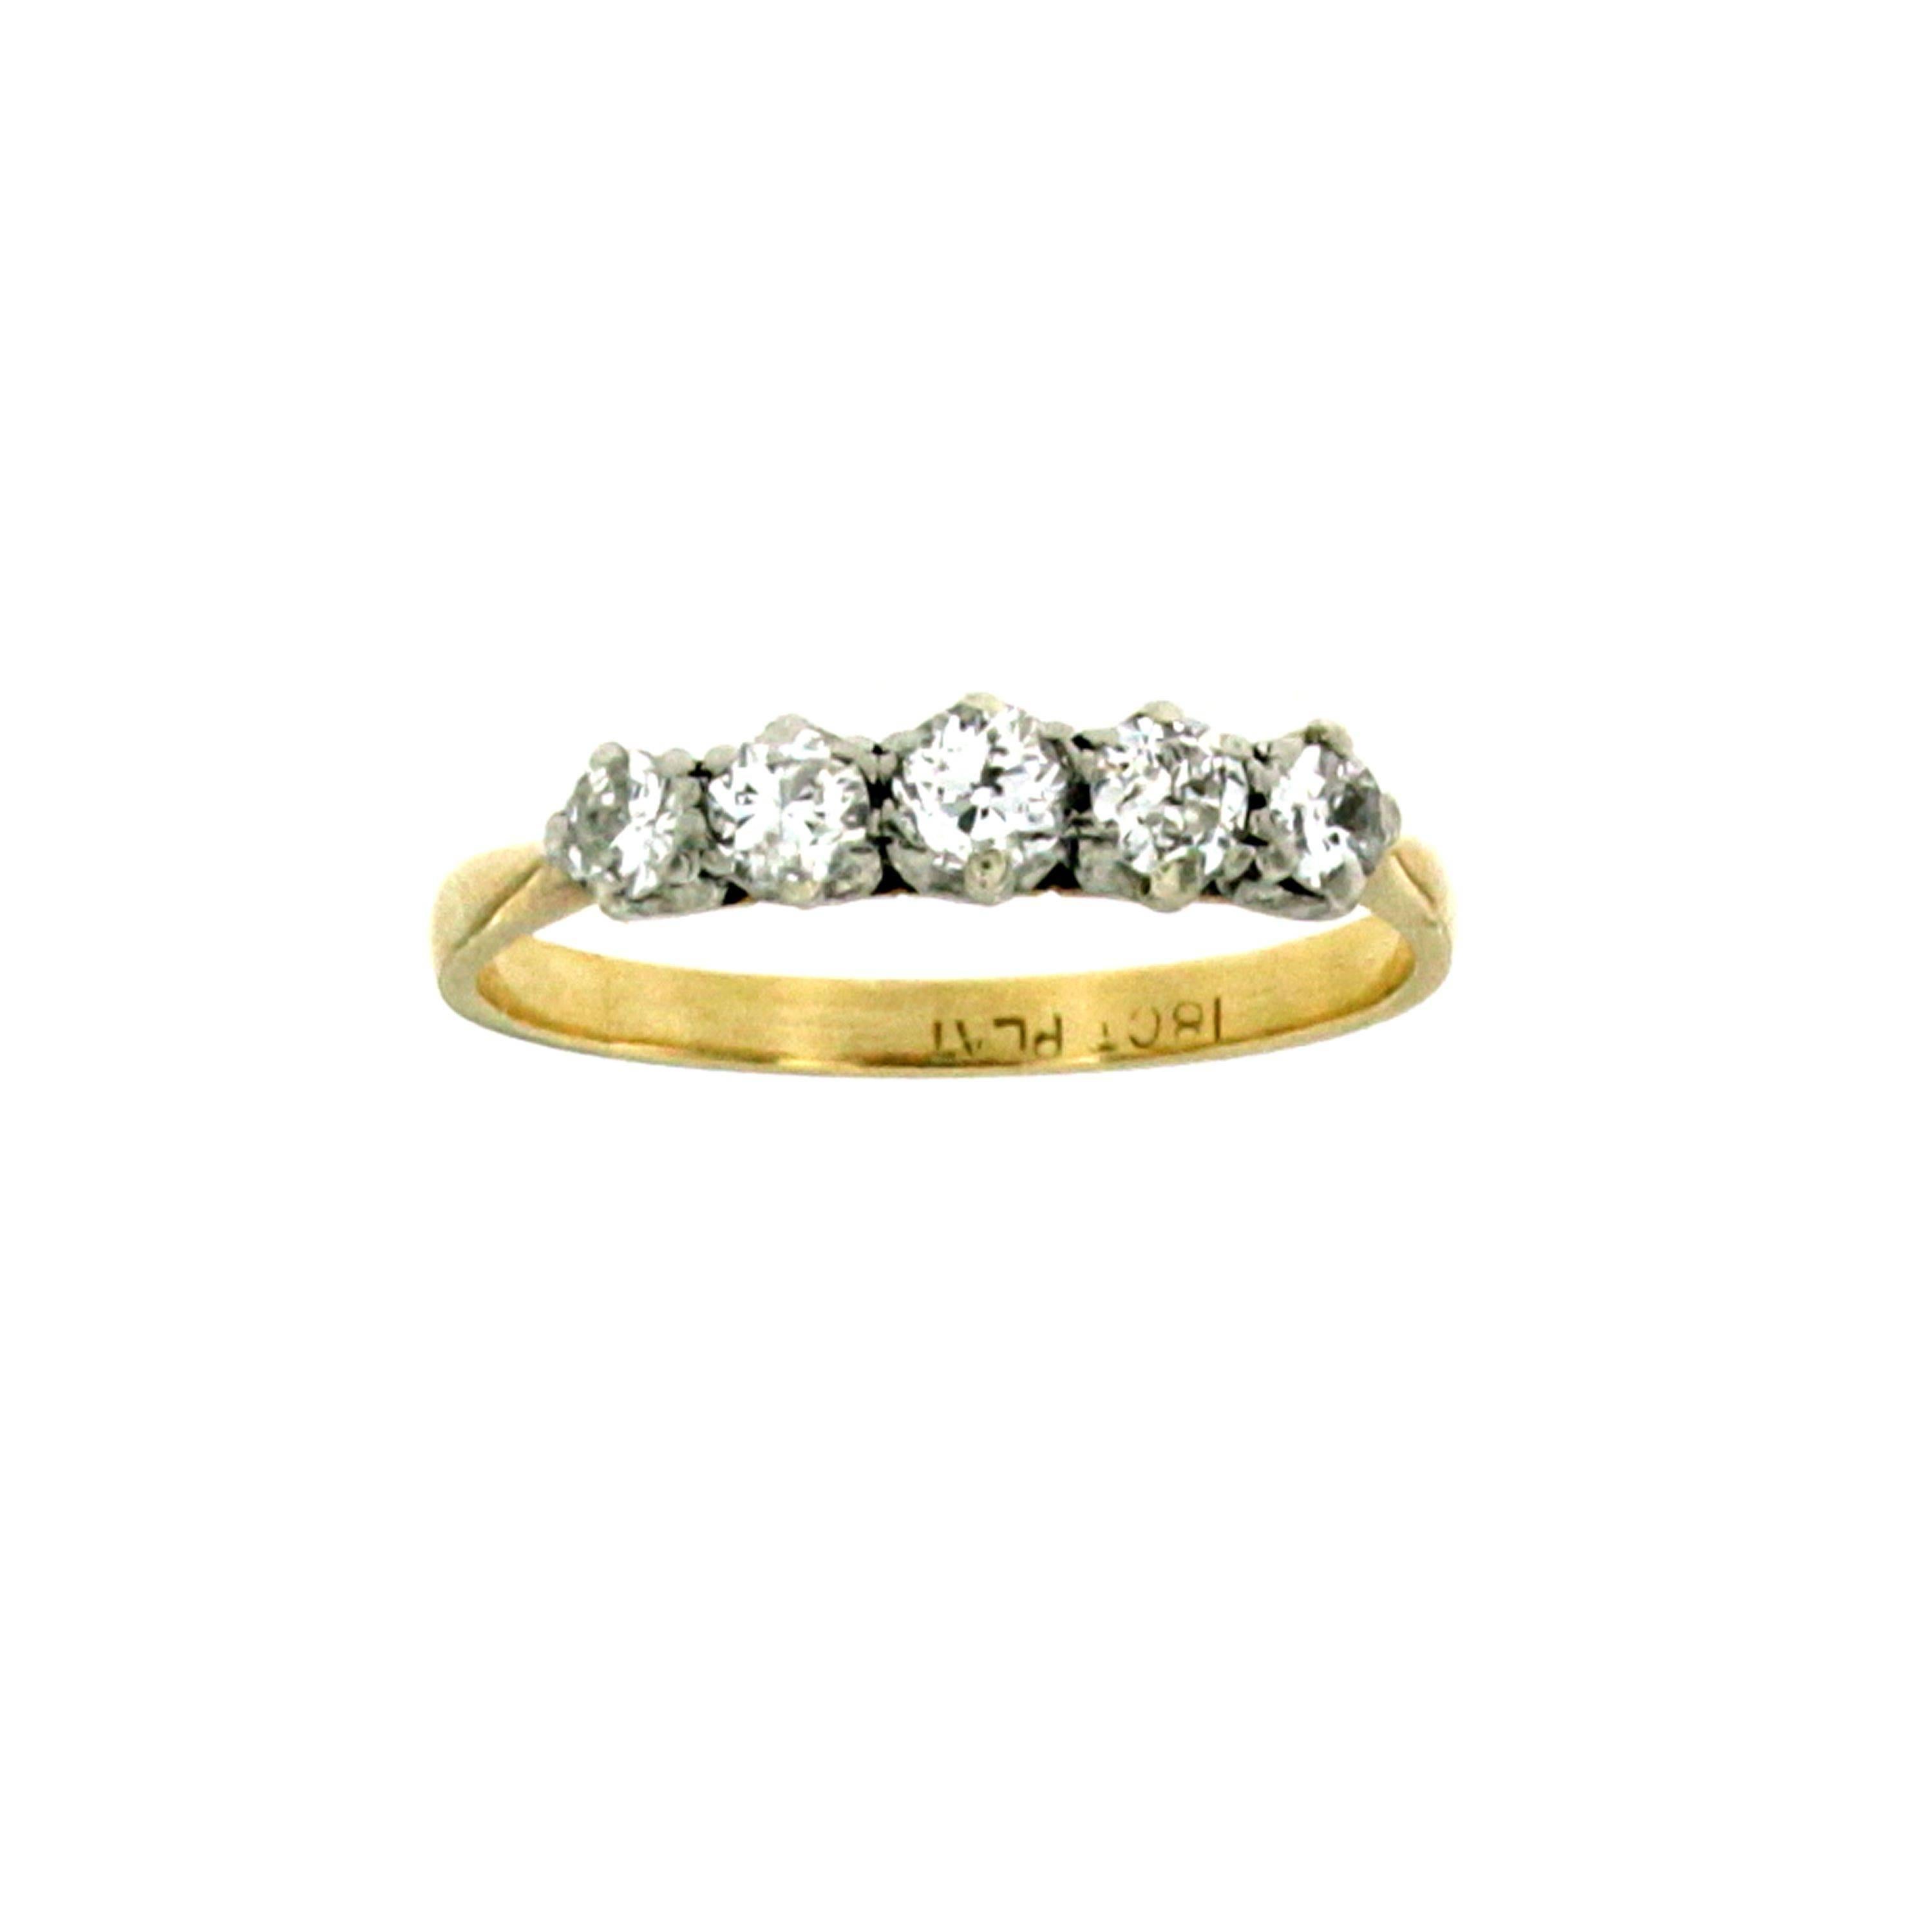 This elegant band ring dated 1940s, is hand-crafted in solid 18k white gold and Platinum, it is set with five sparkling Old mine cut Diamond, weighing all together 0,50 carats and graded H color Vs clarity.
Stamped 18ct and PL 


CONDITION: